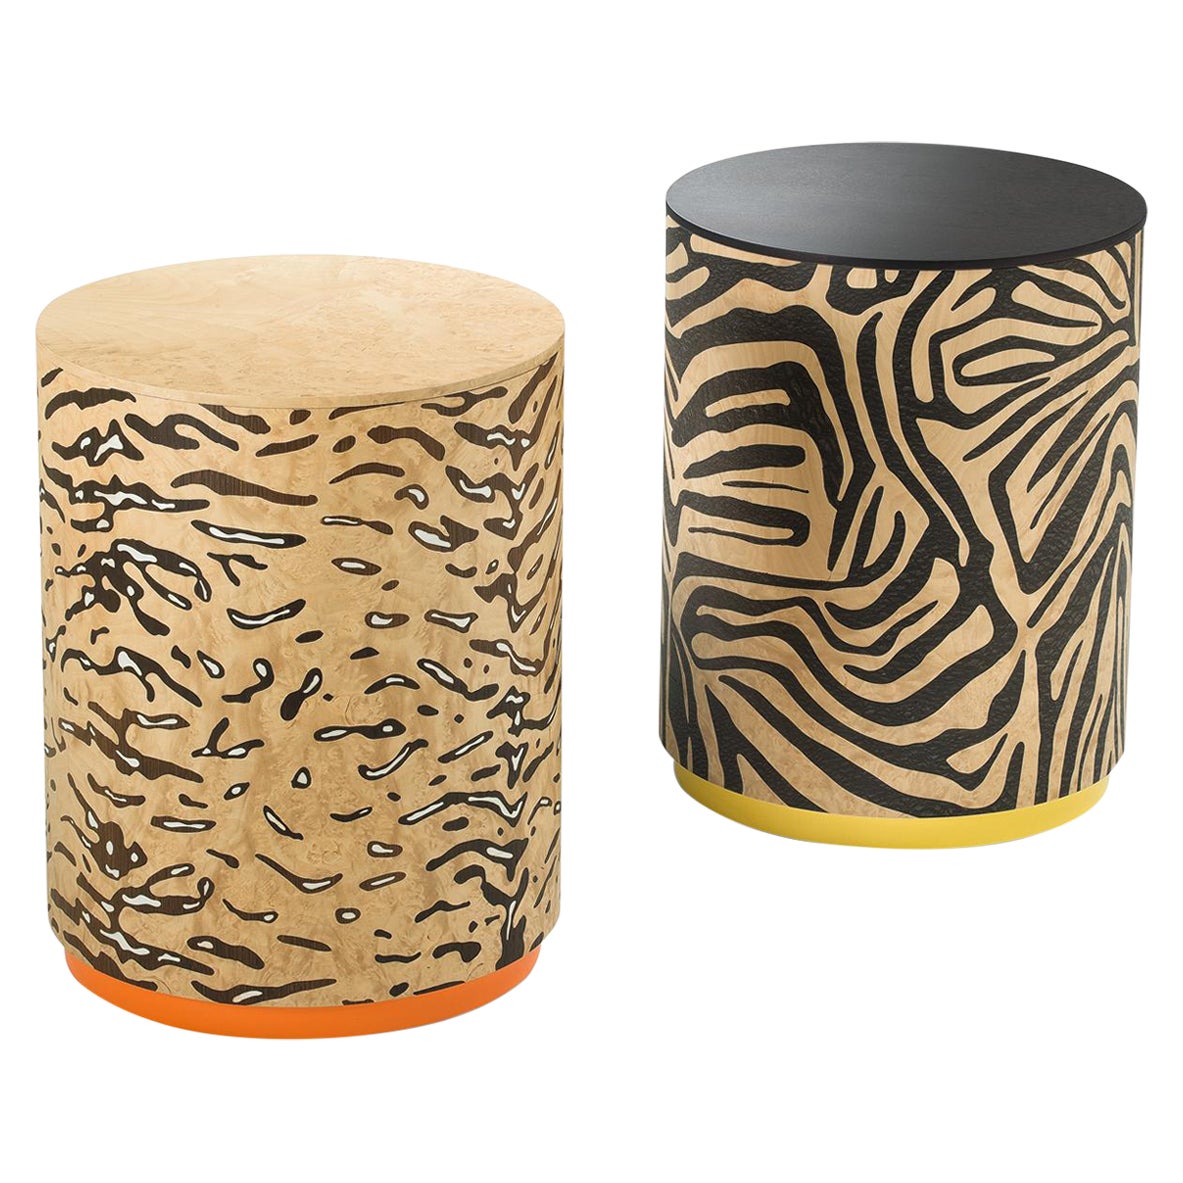 This extraordinary stool boasts a captivating tiger-striped inlay, bringing a touch of the wild into your living space. Crafted with precision, the top features a warm and organic Madrona Root finish, enhancing the stool with a unique and natural